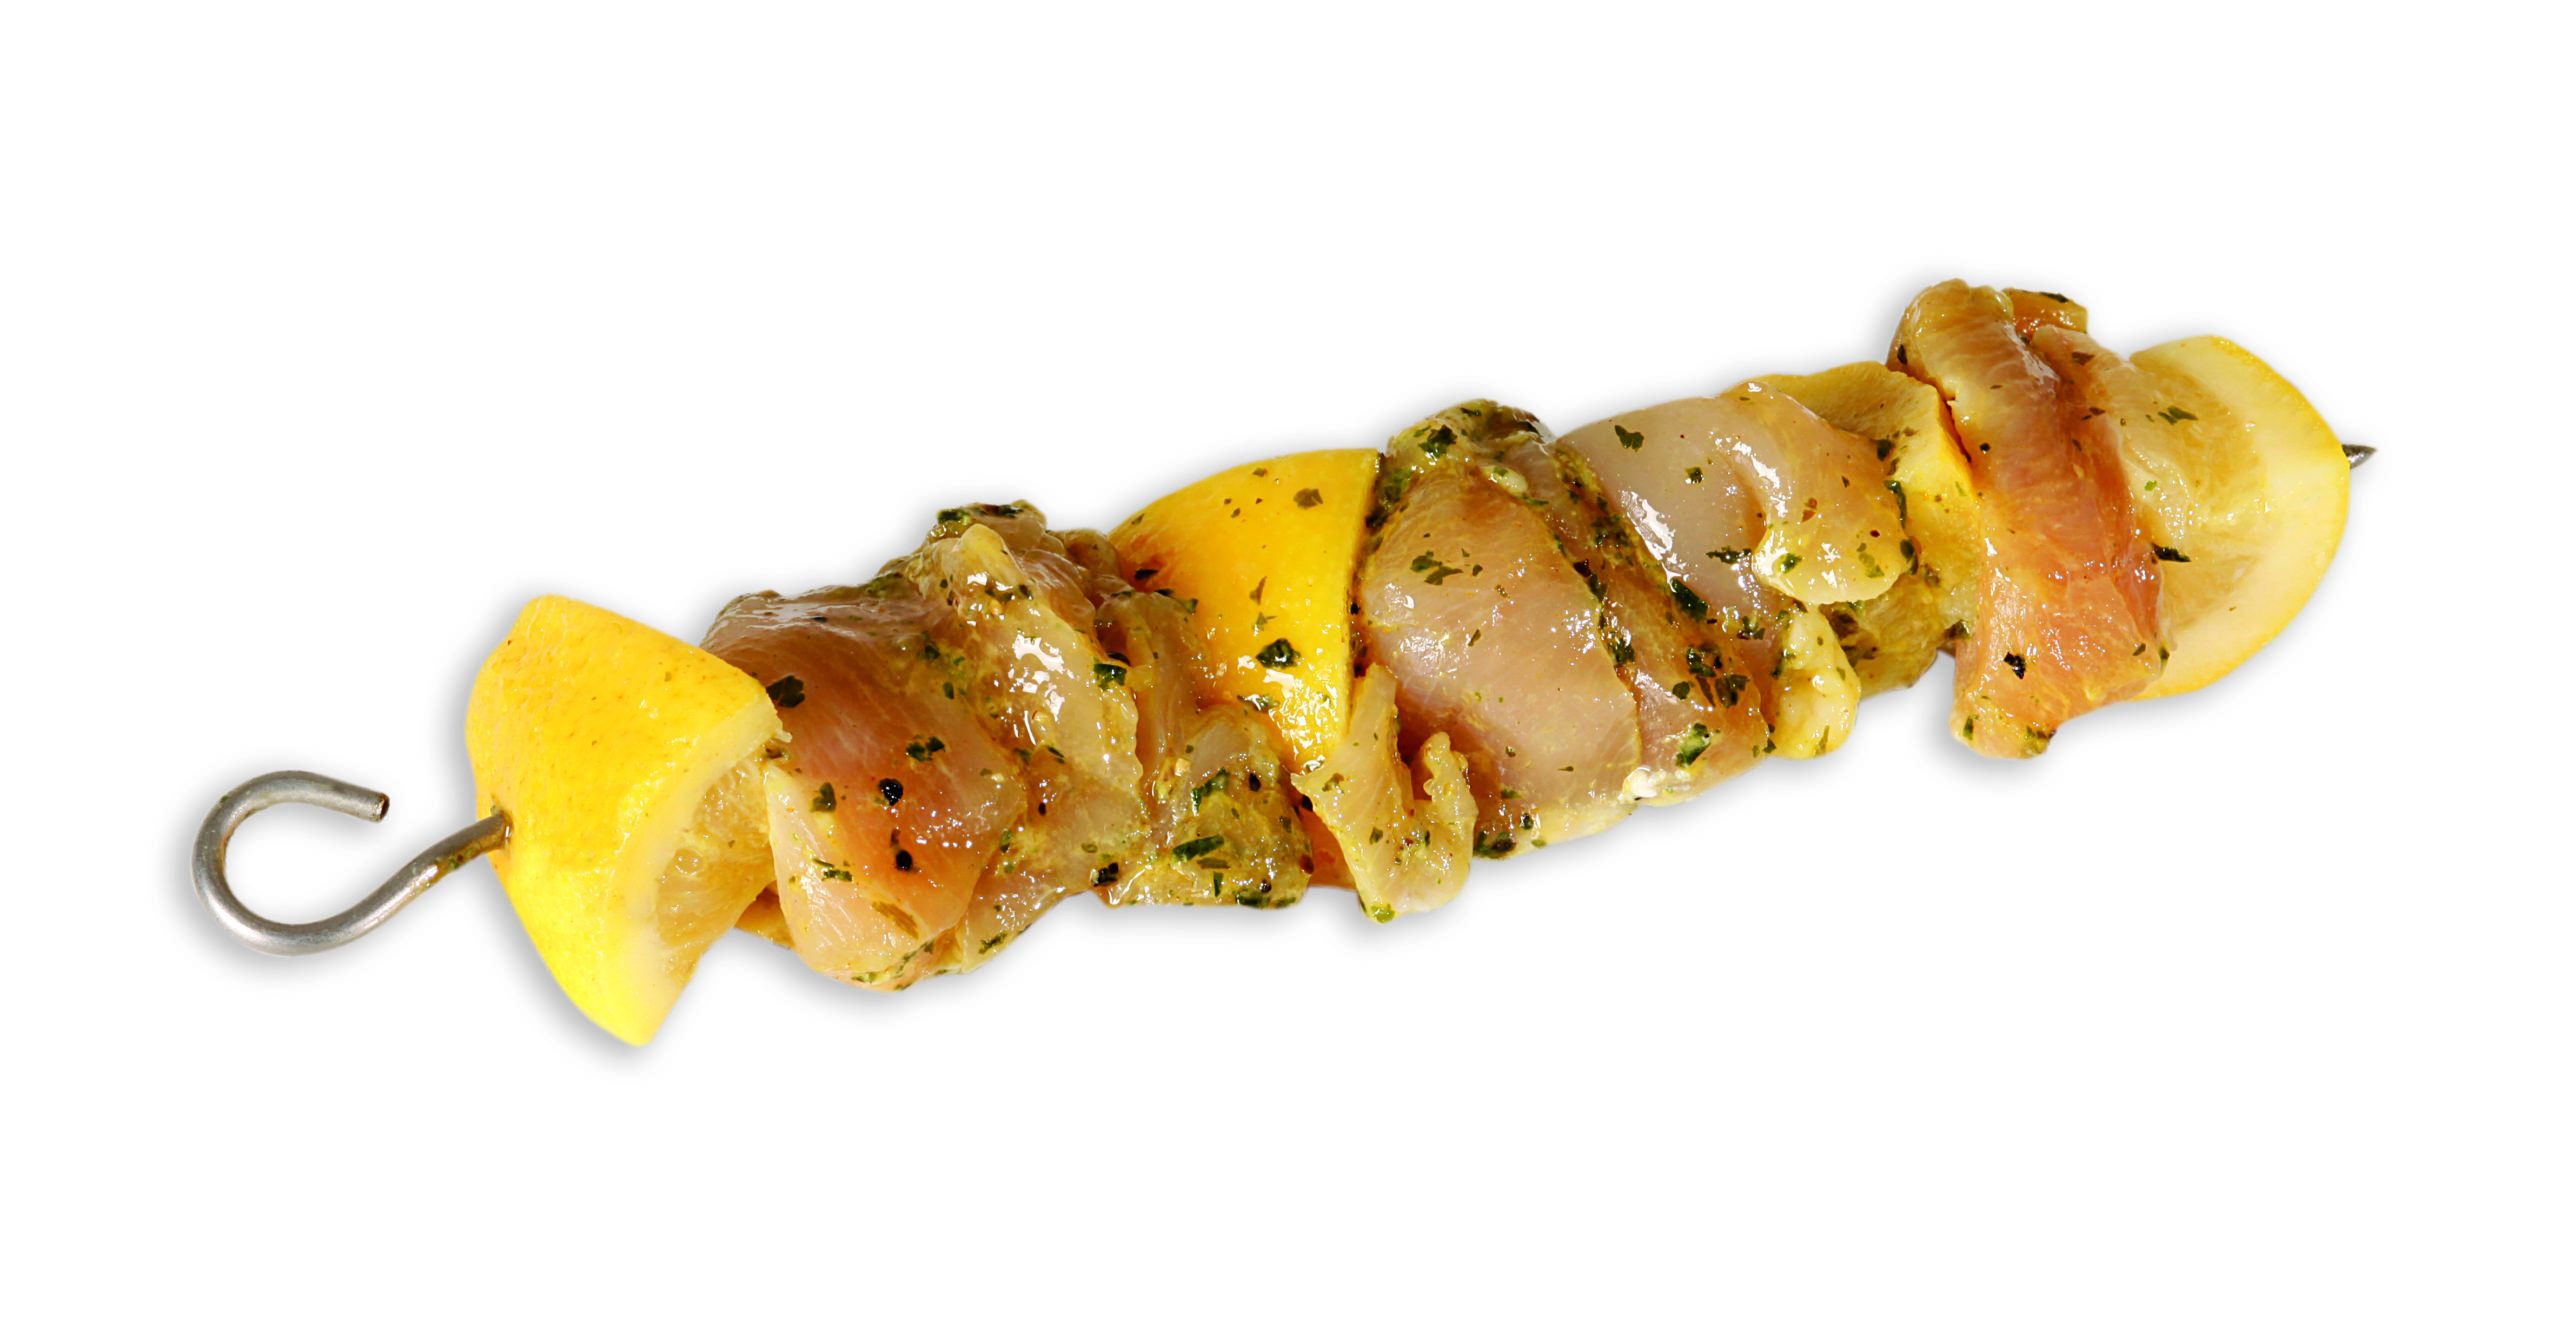 Chicken fillet skewer with lemon and herbs, Délices & Gastronomie - Volatys